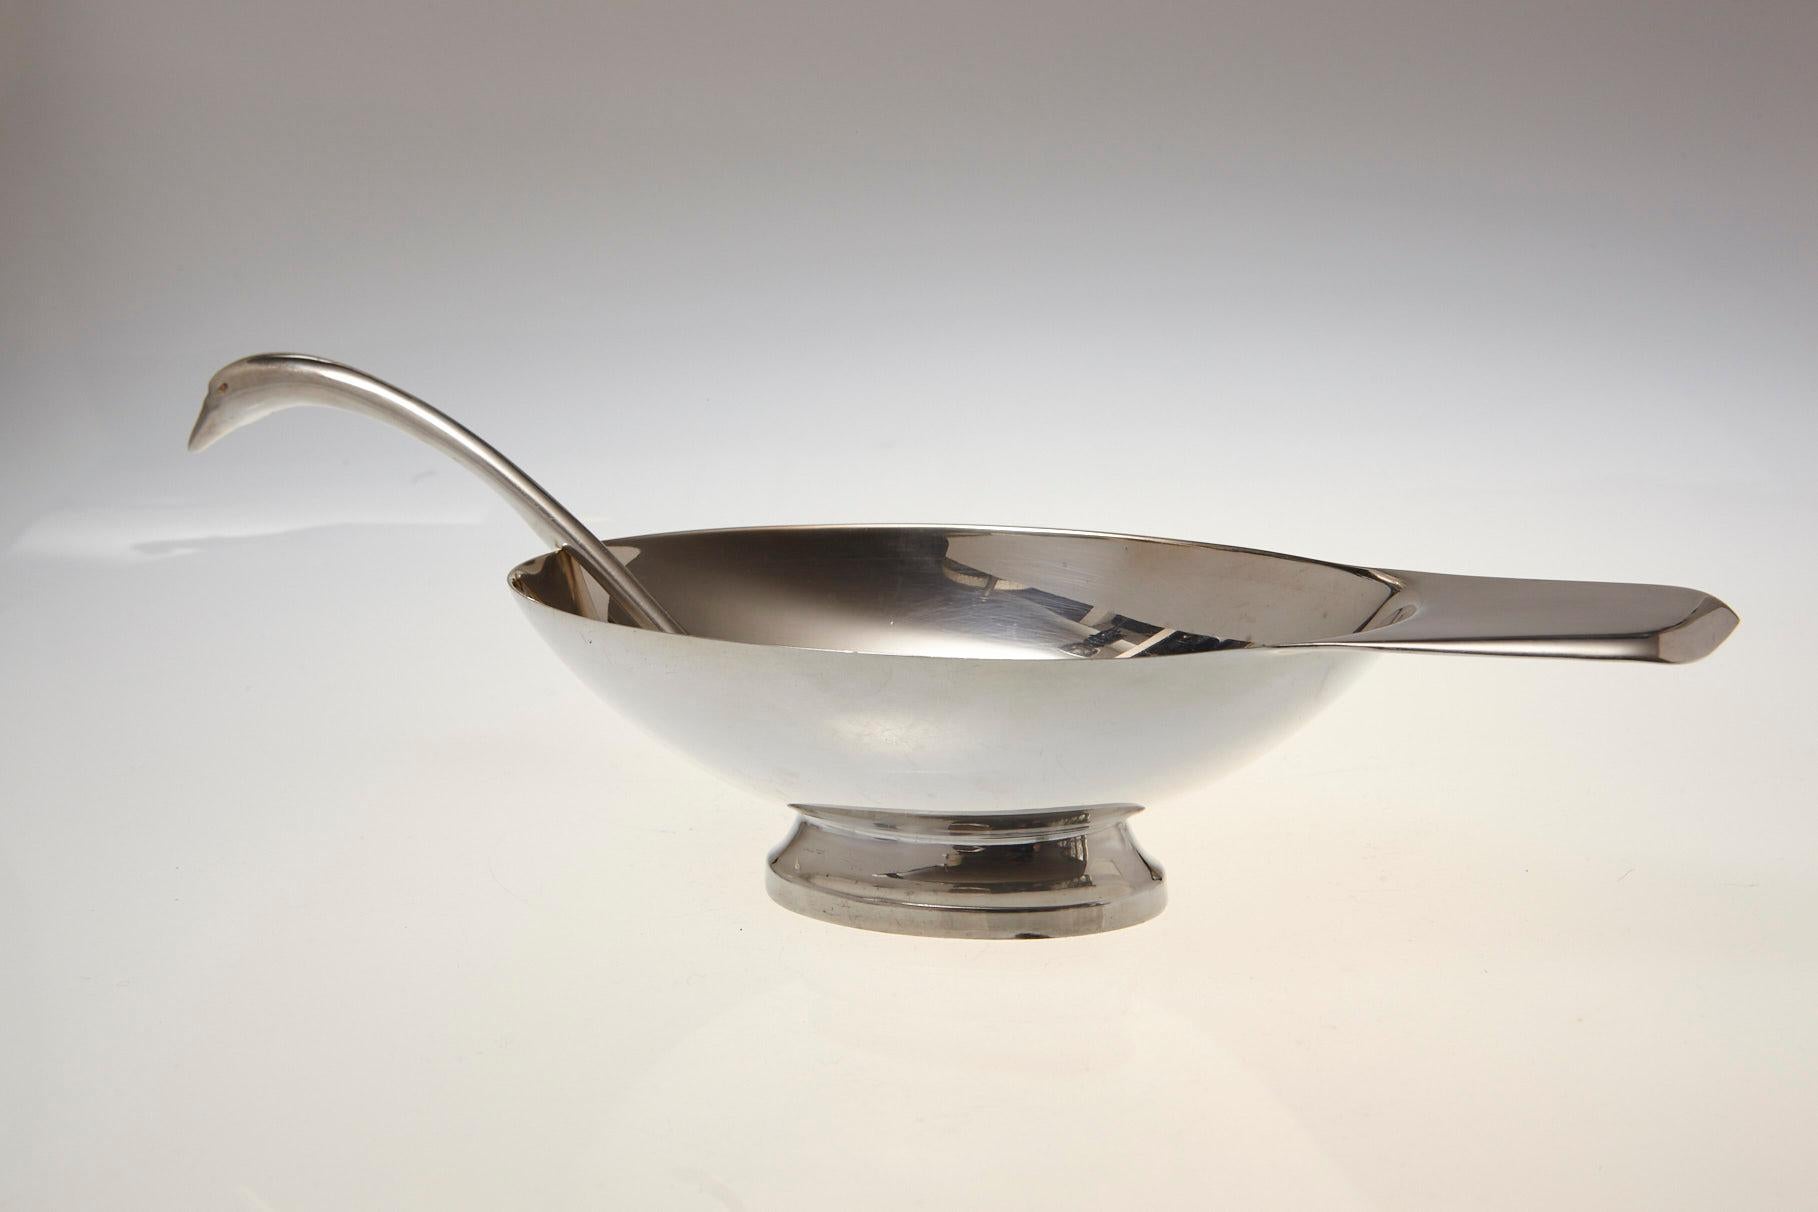 Mid-20th Century Sauciere Cygne, Swan Gravy Boat by Christian Fjerdingstad for Christofle, 1935